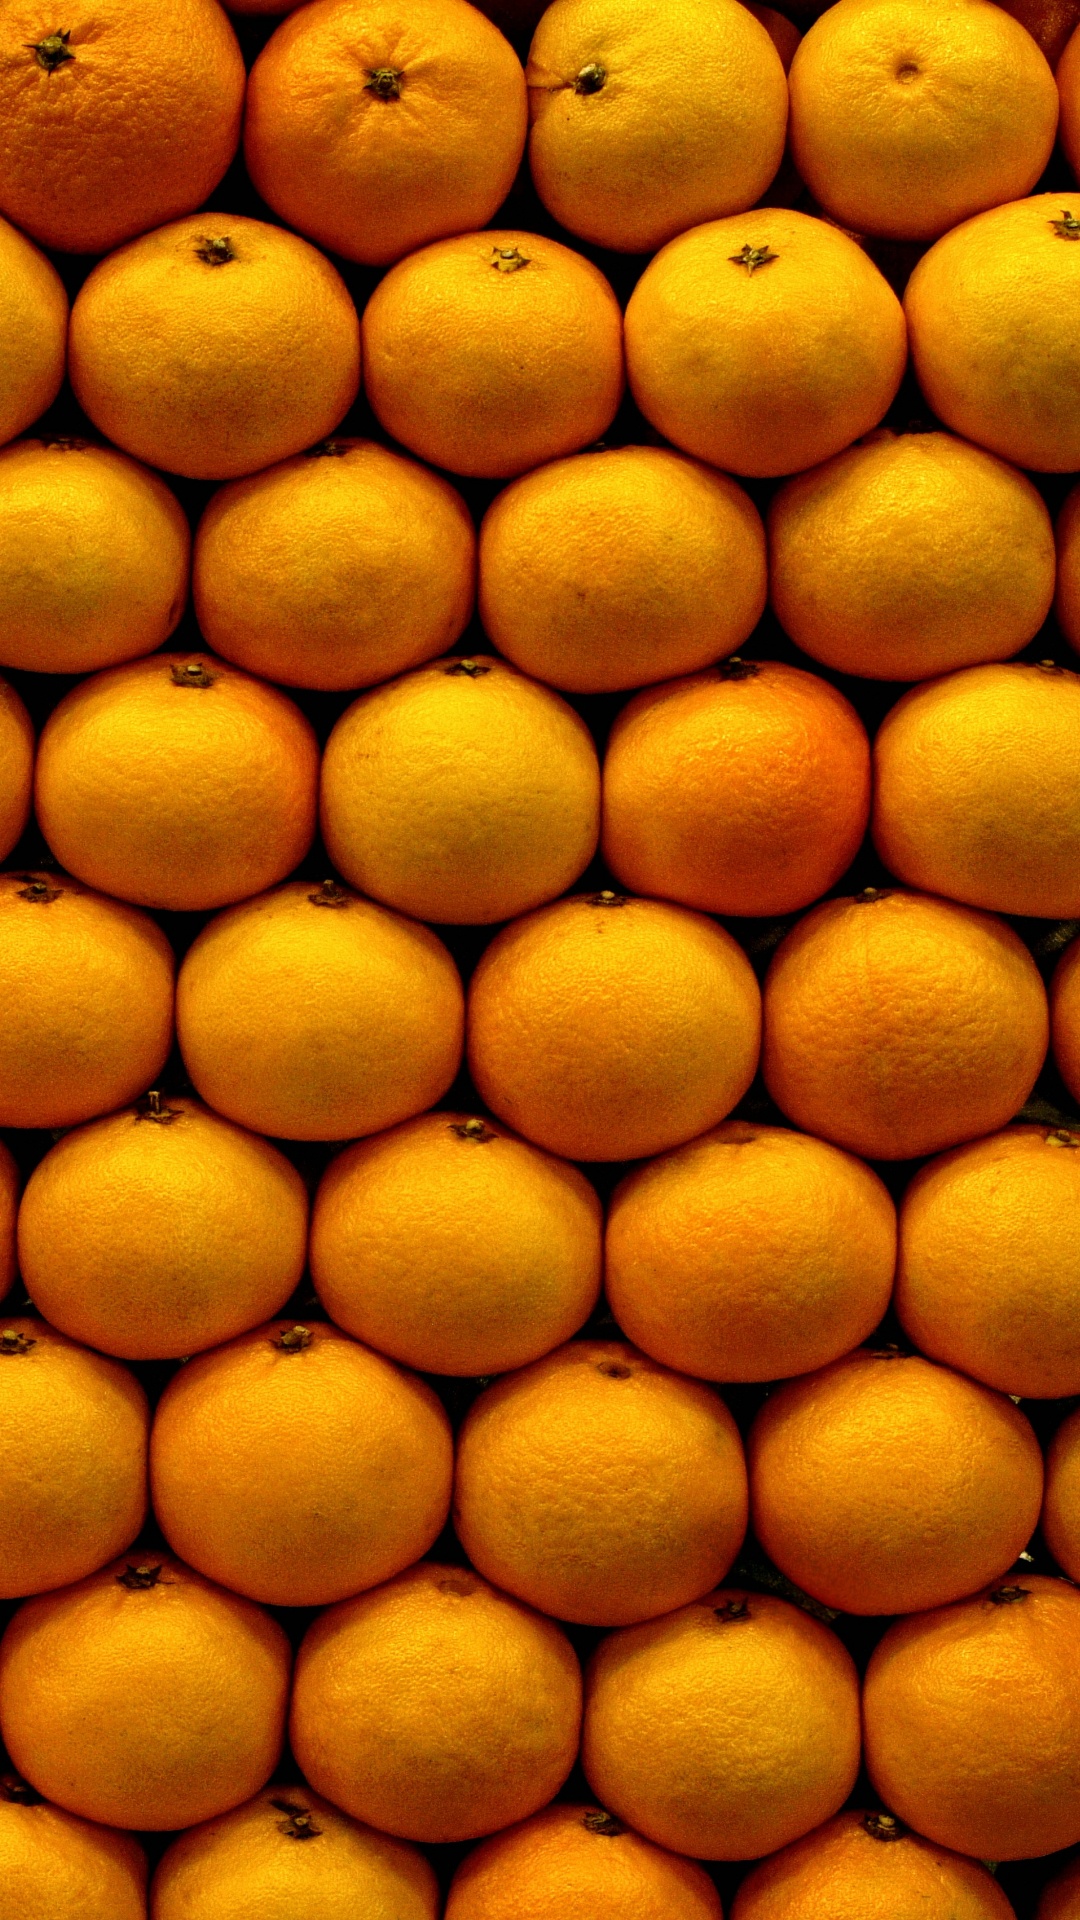 Yellow Round Fruits on White Surface. Wallpaper in 1080x1920 Resolution